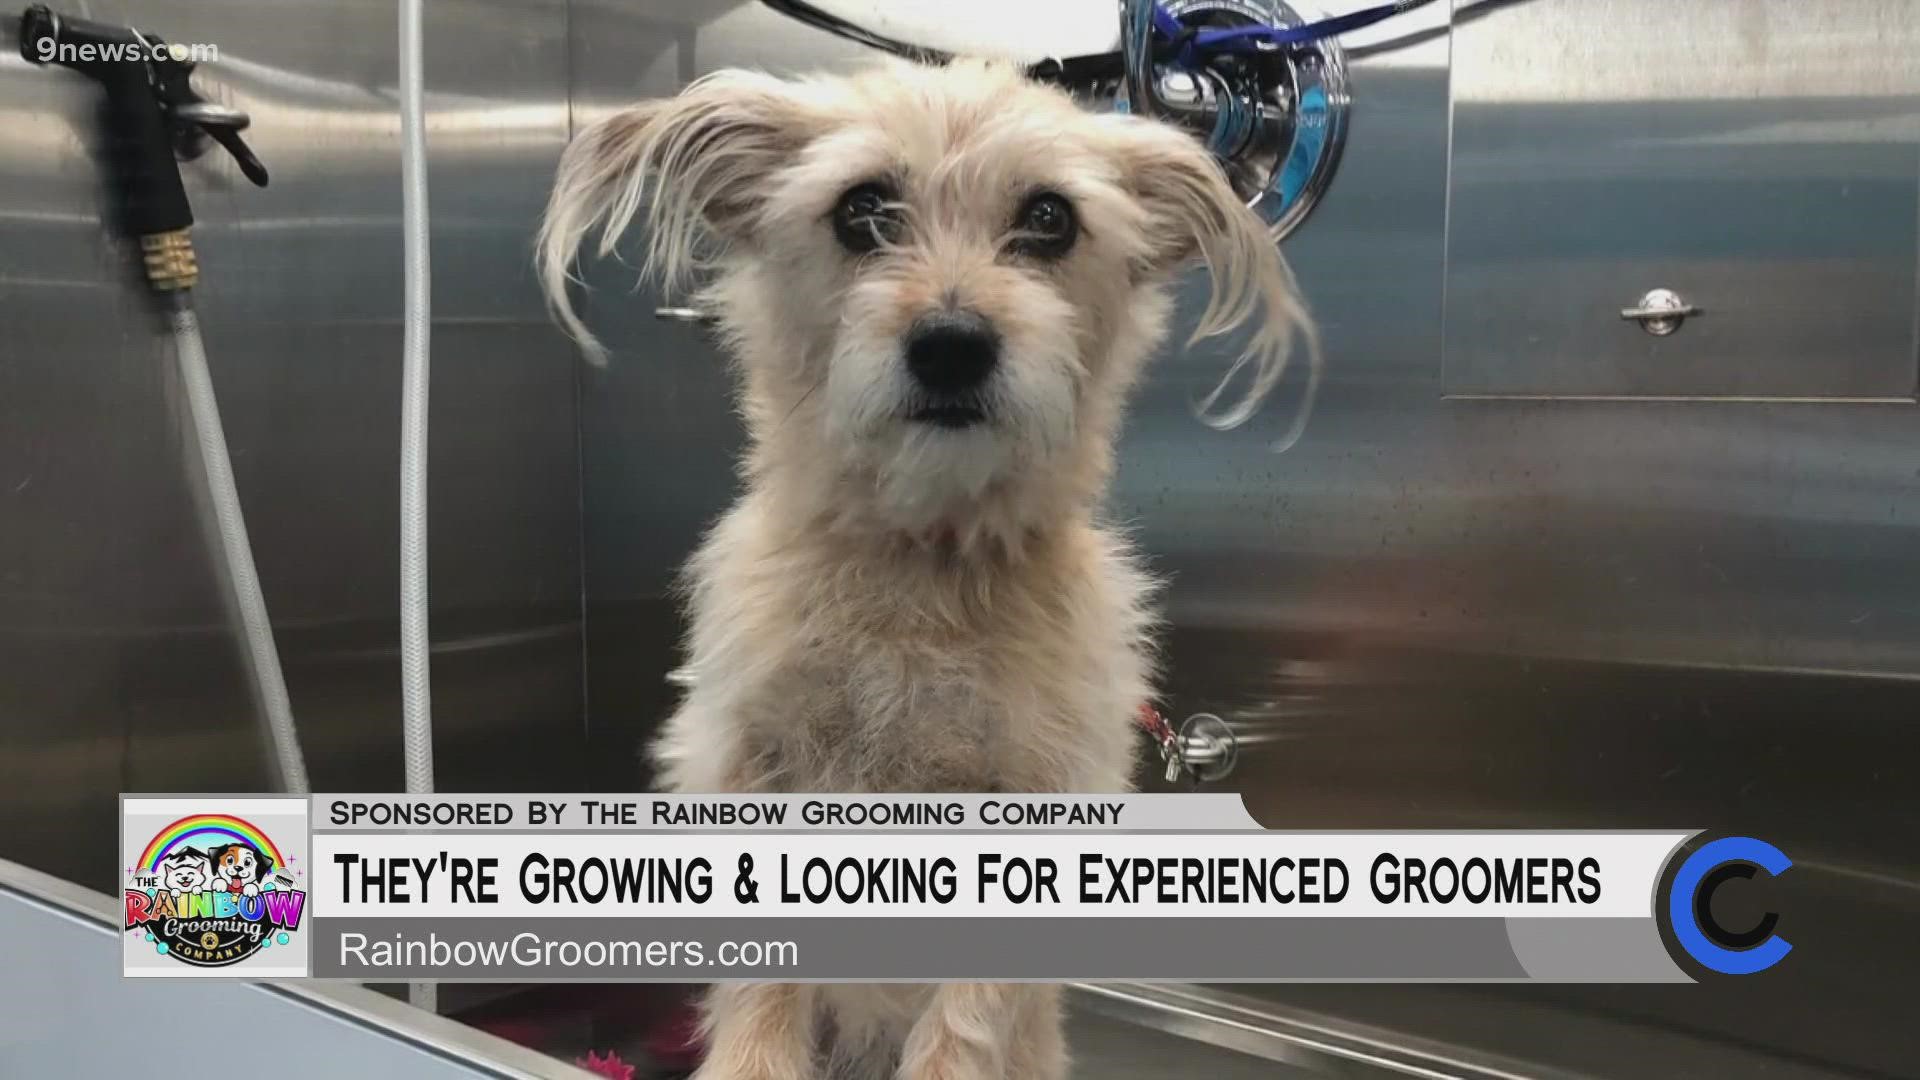 Visit RainbowGroomers.com to schedule your pet's next grooming session. **PAID CONTENT**